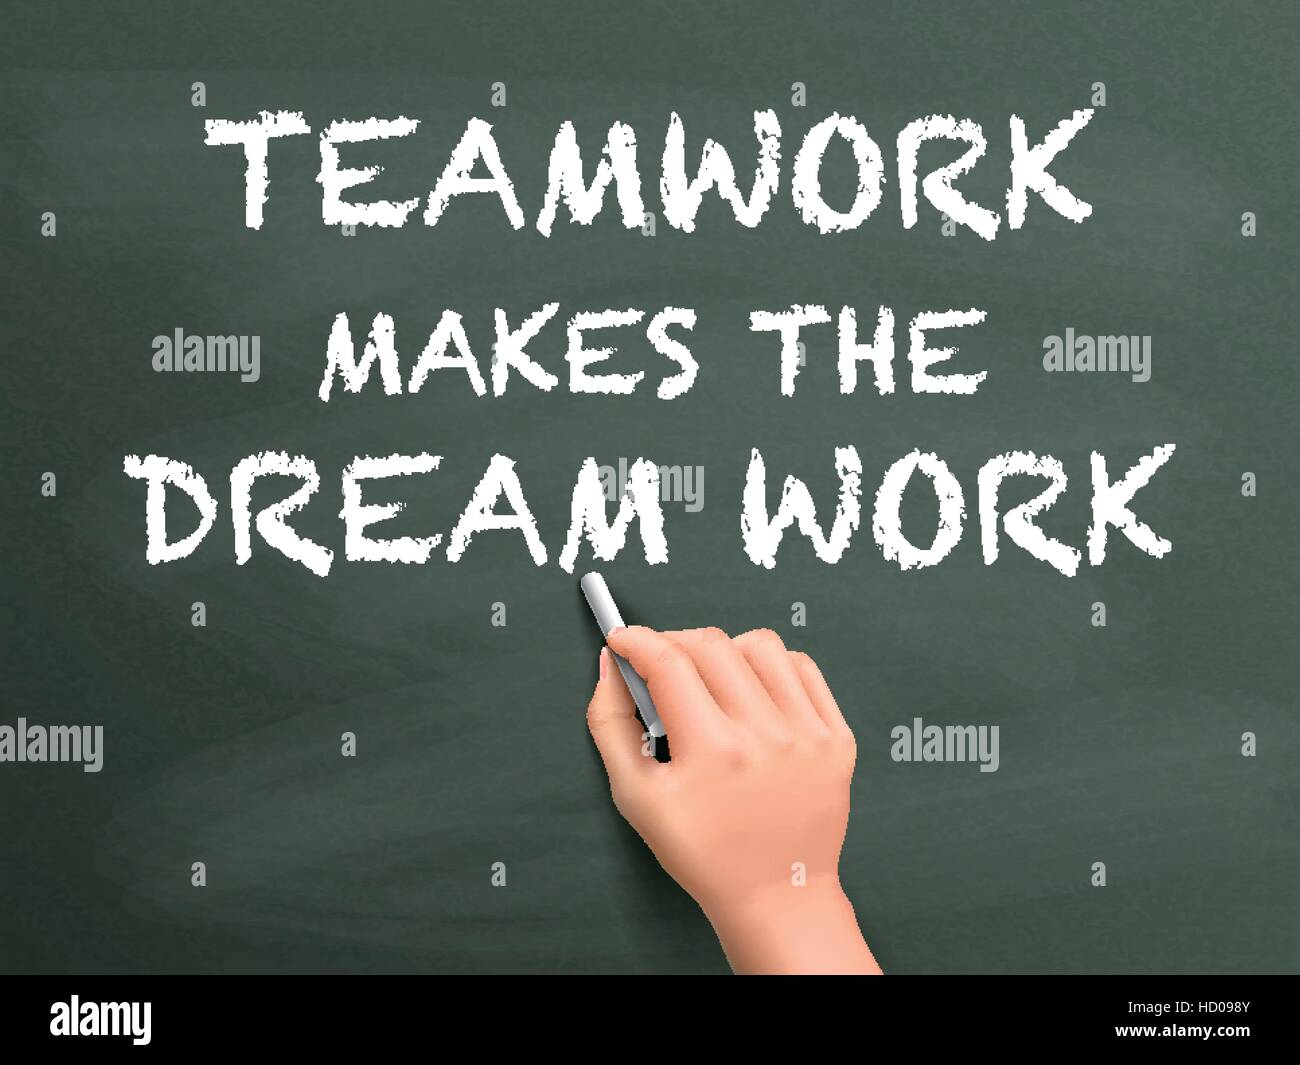 teamwork makes the dream work written by hand isolated on blackboard Stock Vector